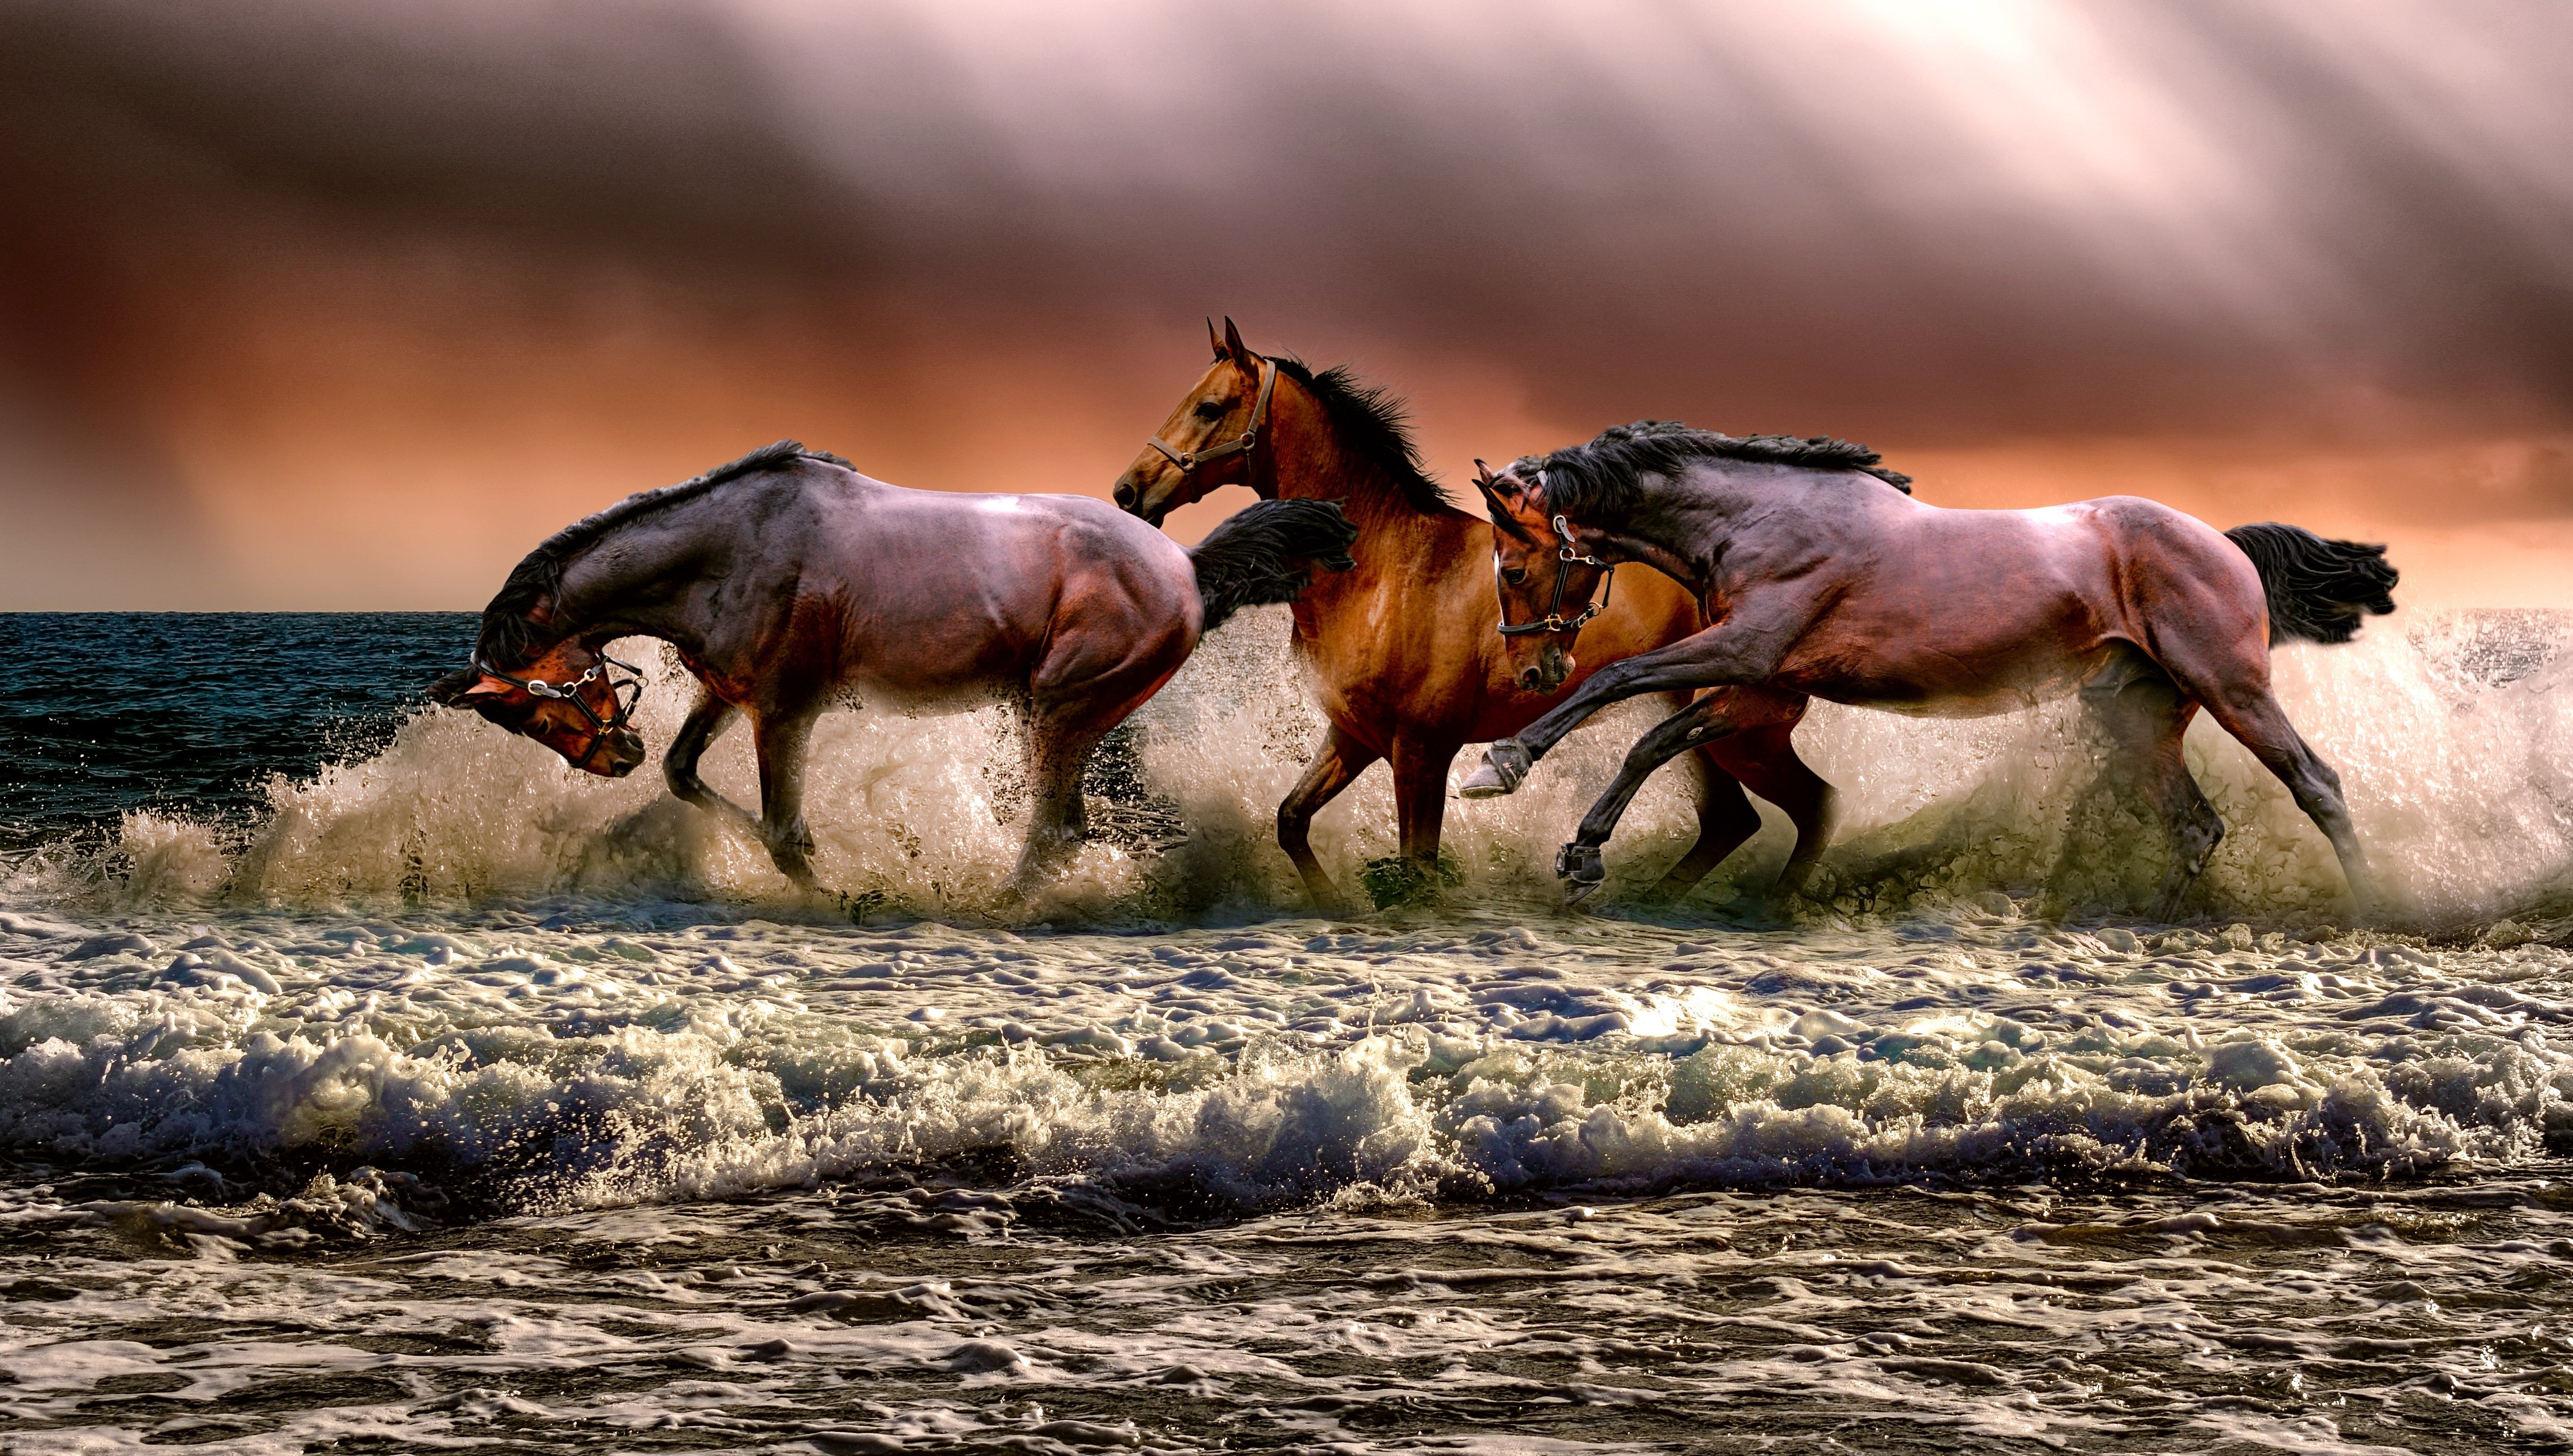 The Horses Running in Water | Wallpapers Share